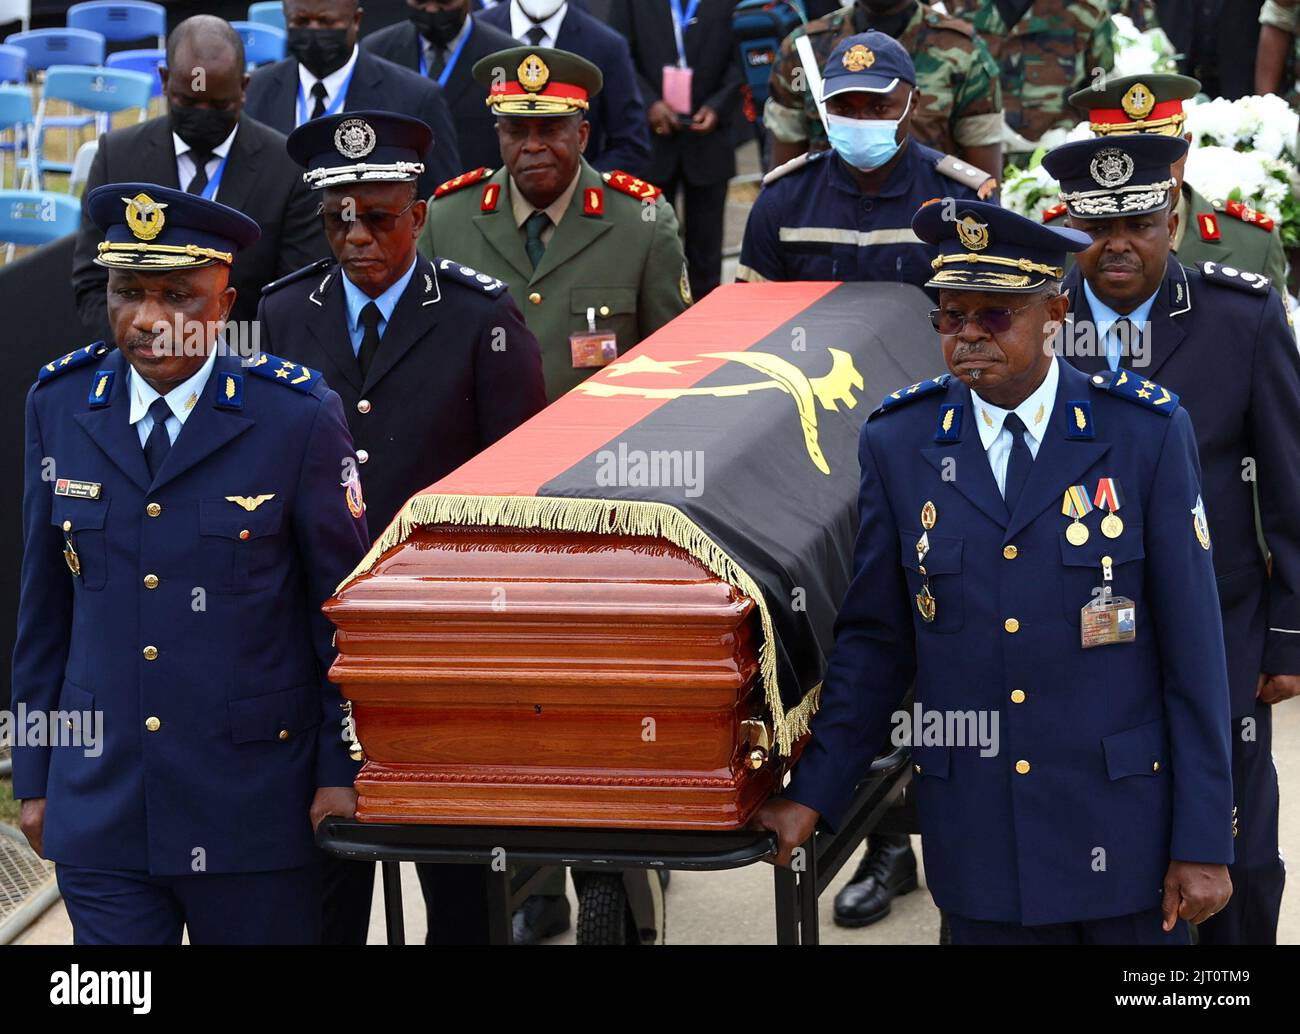 A casket carrying the body of Angola's former President Jose Eduardo dos Santos, who died in Spain in July, arrives at the Agostinho Neto Memorial, during his memorial service in Luanda, Angola, August 27, 2022. REUTERS/Siphiwe Sibeko Stock Photo